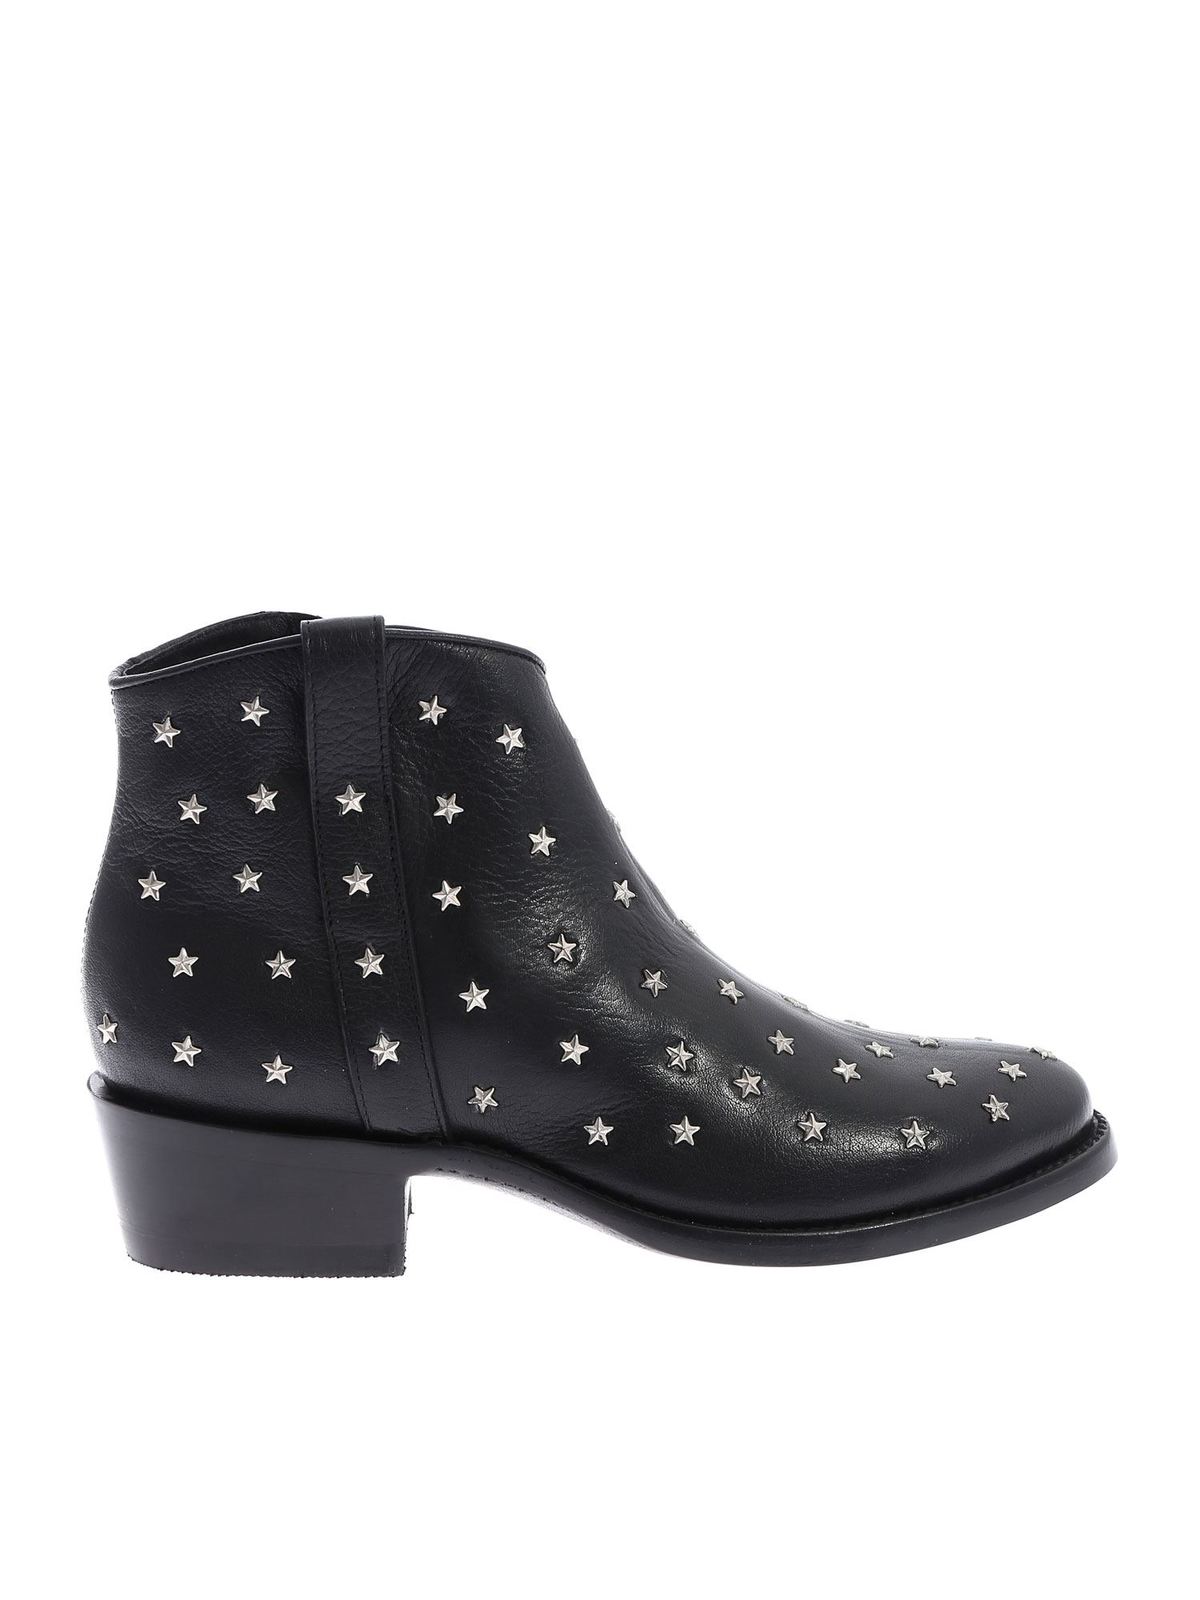 MEXICANA ETOILE 3 TEXAN BOOTS IN BLACK WITH STARS